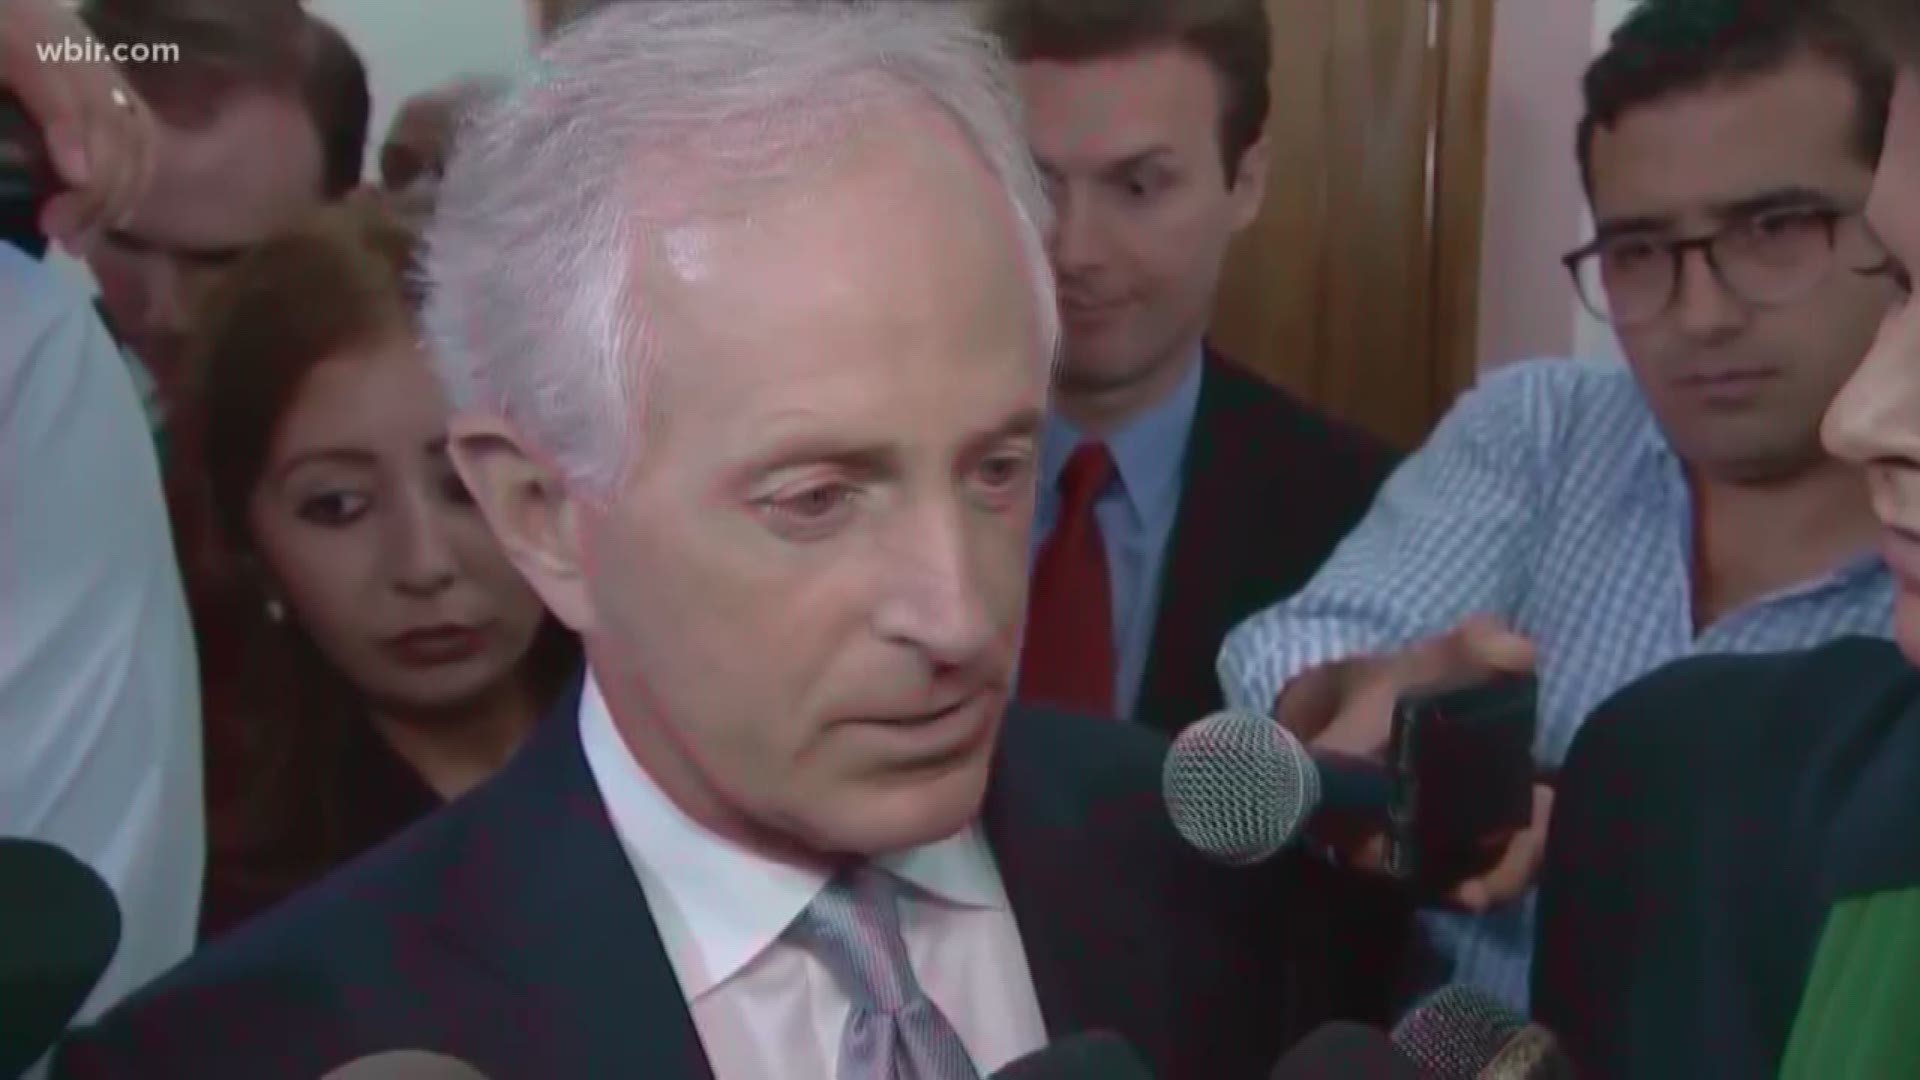 The latest political jab made by Senator Bob Corker directed at President Trump.